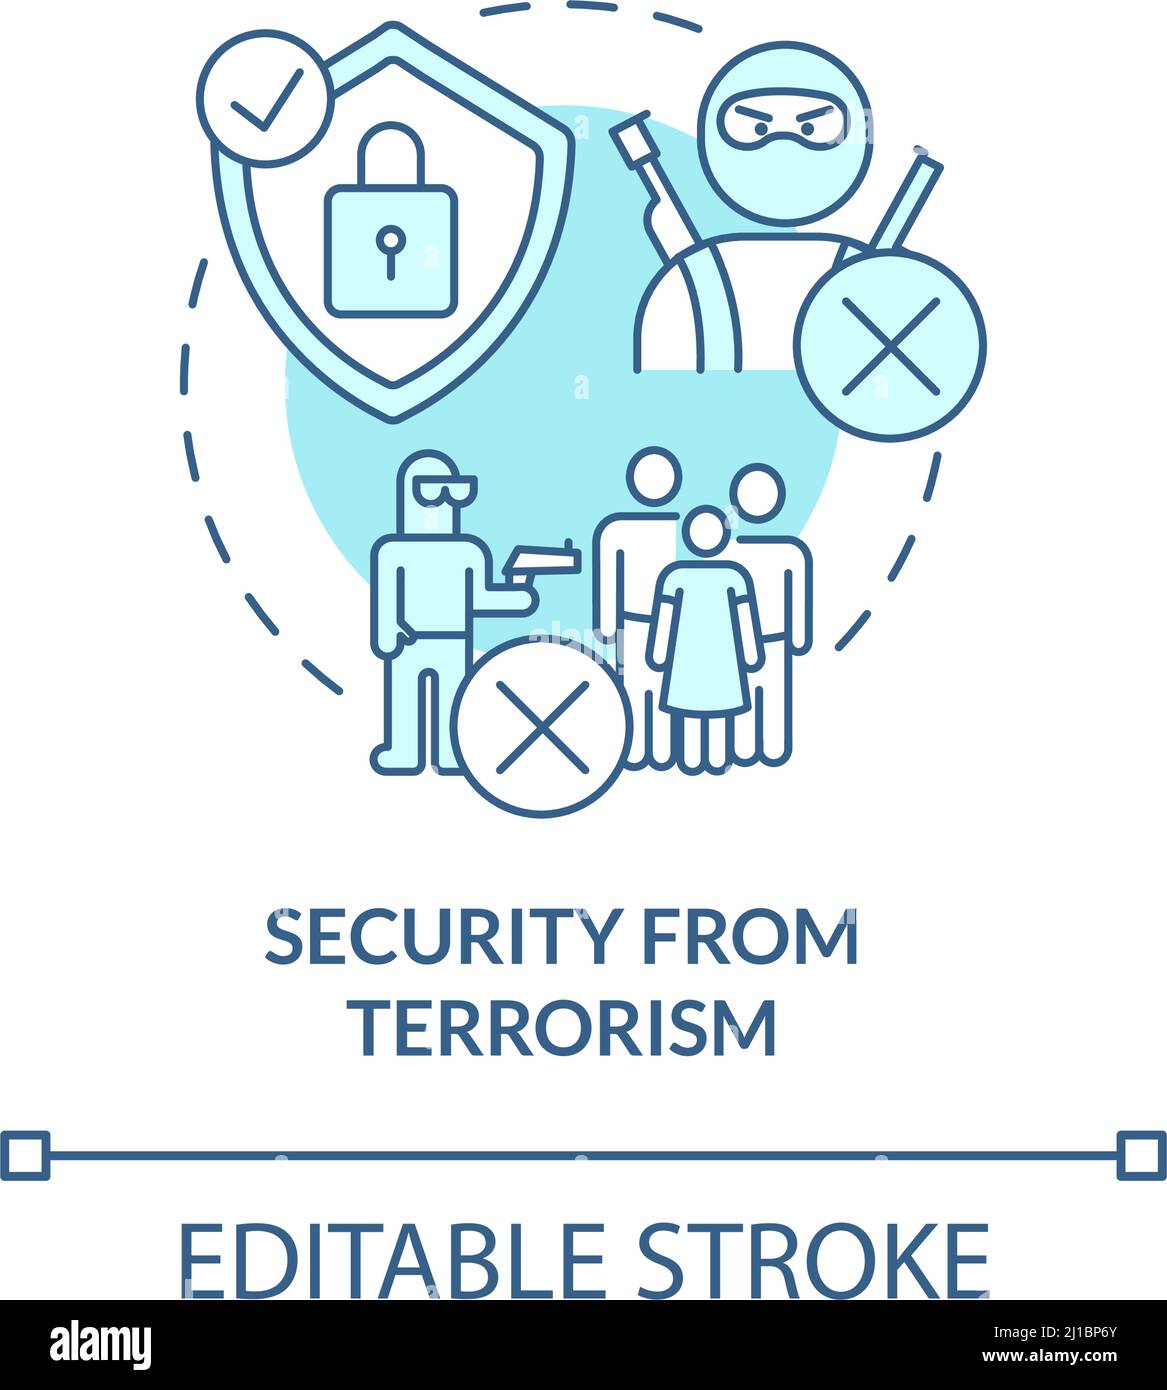 Security from terrorism turquoise concept icon Stock Vector